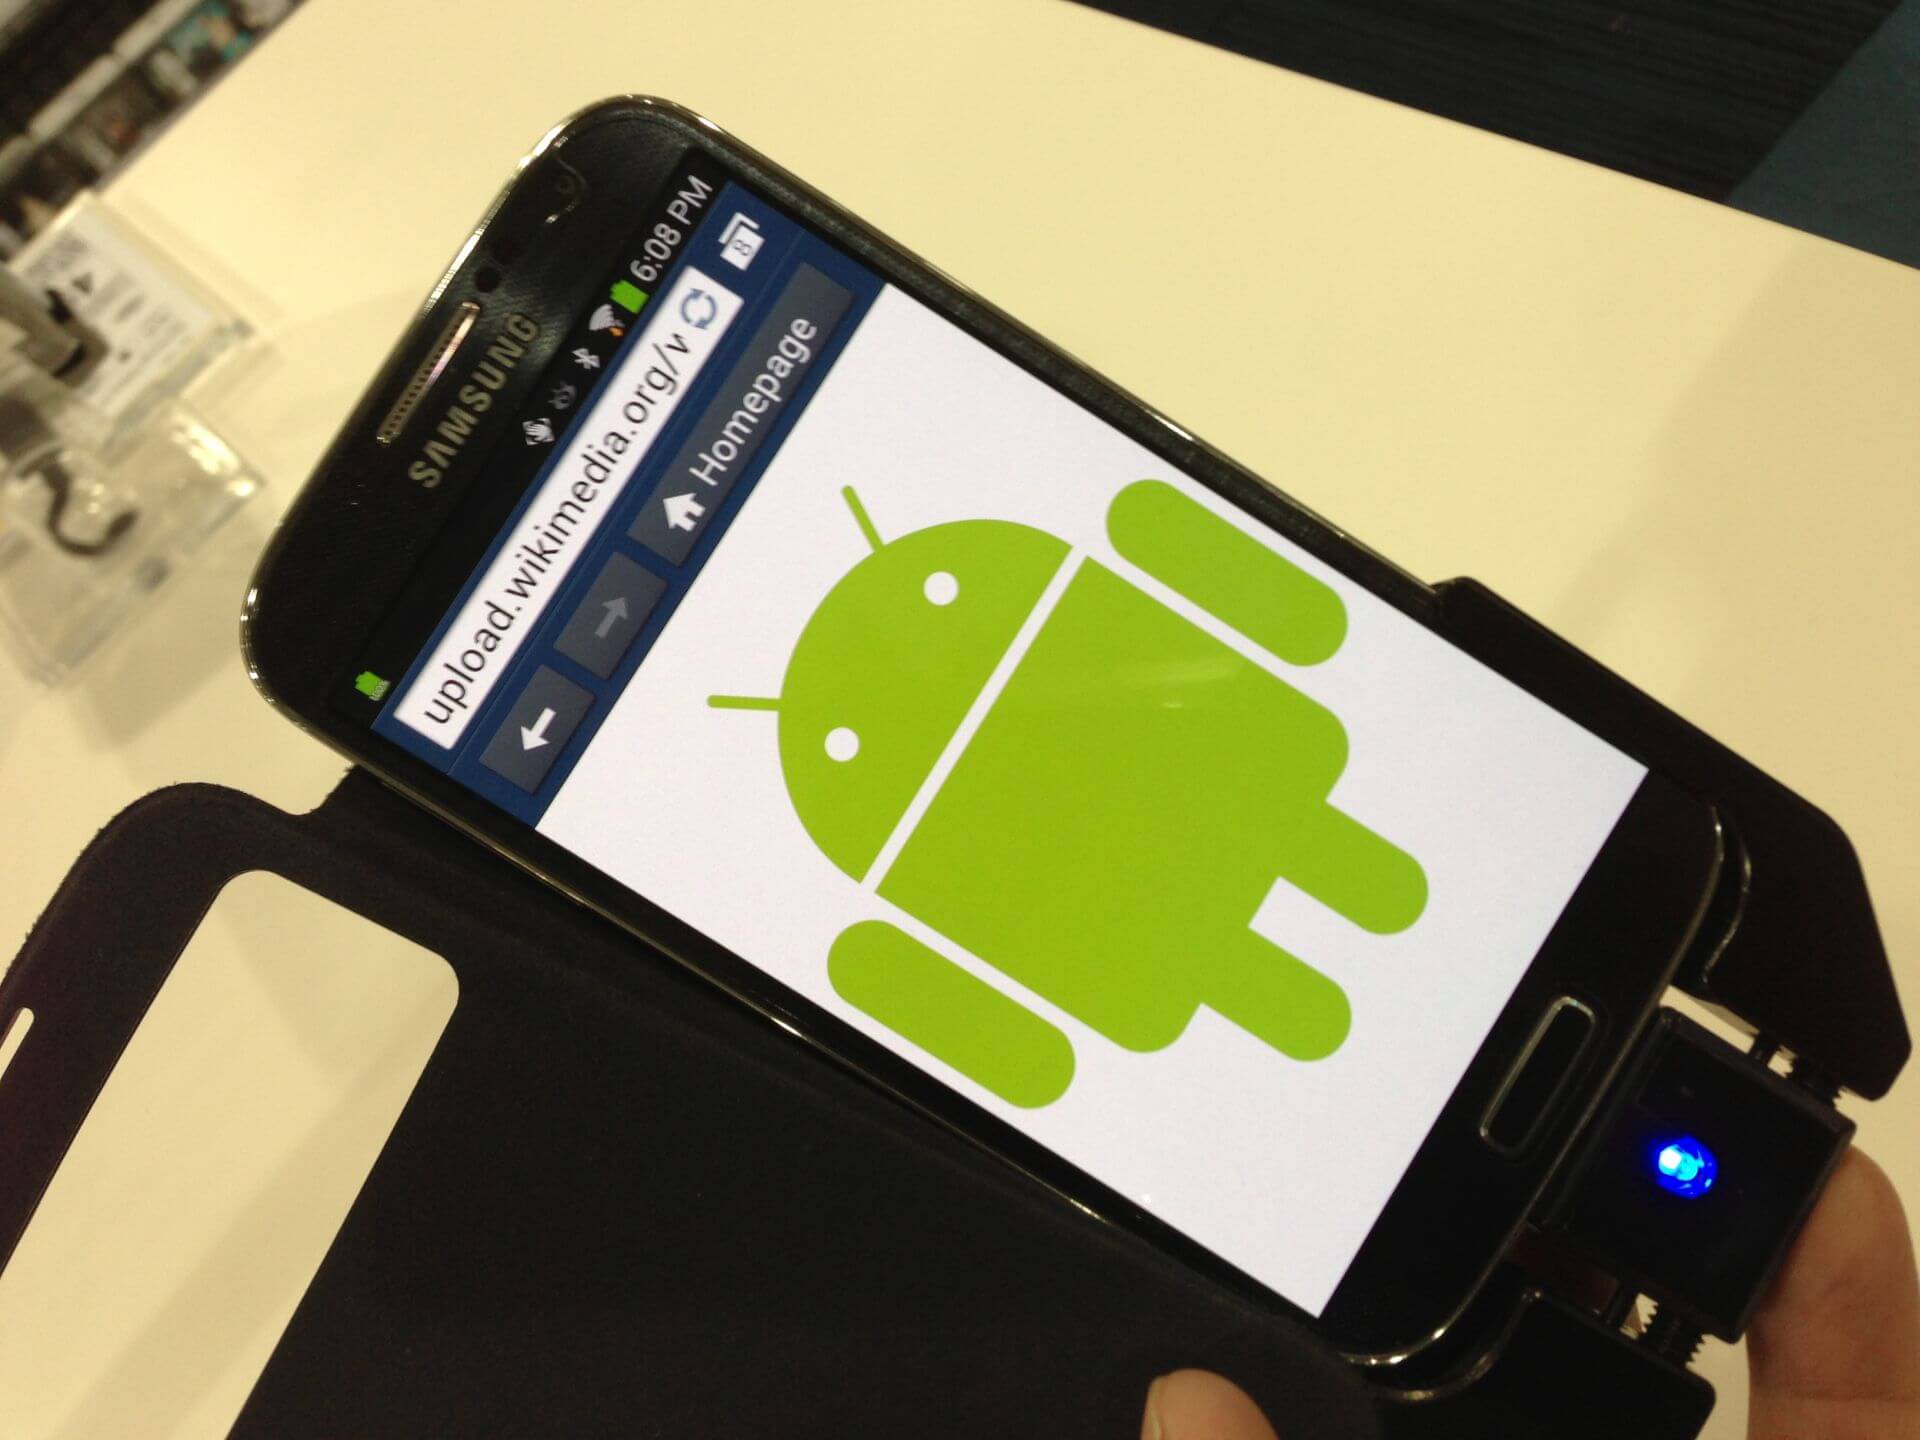 Meet ‘Stagefright’, the worst Android vulnerability in mobile OS history